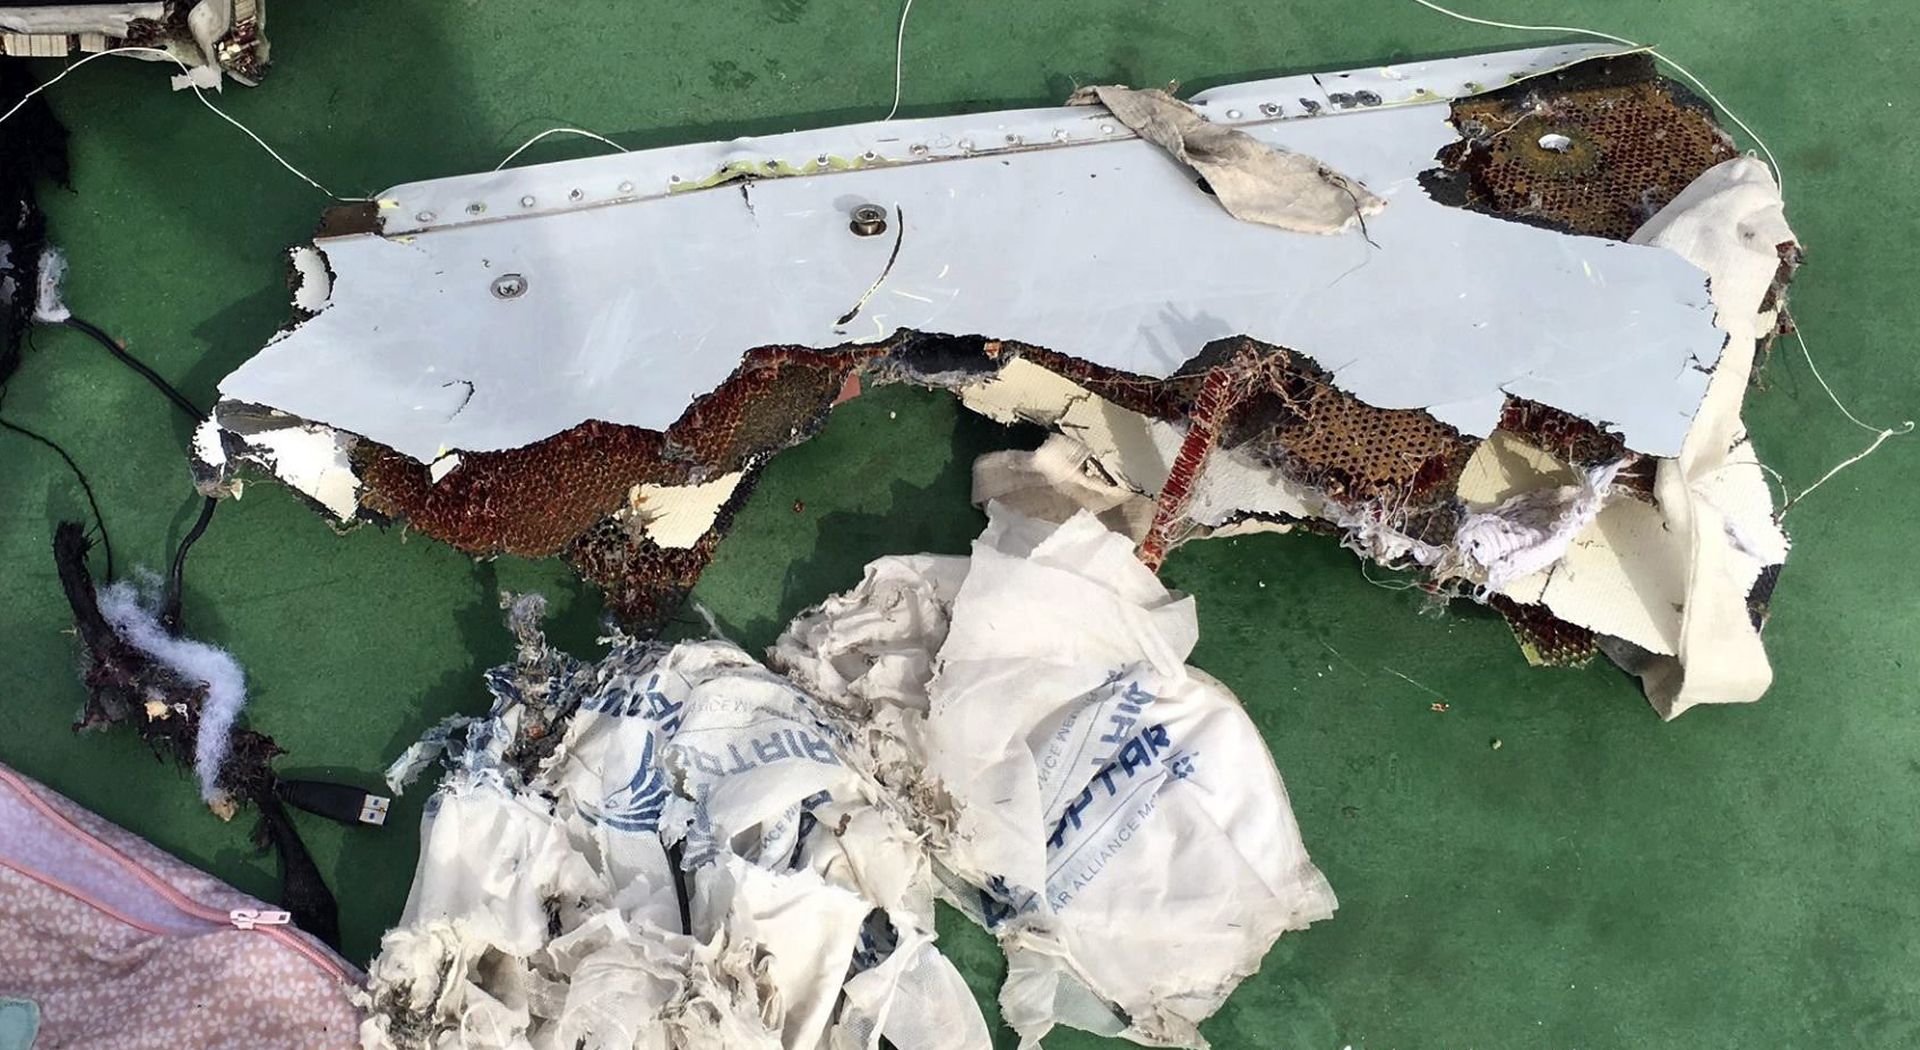 epa05320978 A handout picture made available by the Egyptian Defence Ministry showing pieces of debris from the EgyptAir MS804 flight missing at sea, unspecified location in Egypt, 21 May 2016. The Armed Forces of Egypt announced that the debris of an EgyptAir Airbus A320, which had disappeared early on 19 May 2016, as well as personal belongings of the passengers are floating in the Mediterranean Sea, north of the Egyptian city of Alexandria. The EgyptAir passenger jet had left Paris bound for Cairo with 66 people on board, but crashed into the Mediterranean Sea for unknown reasons.  EPA/EGYPTIAN DEFENCE MINISTRY / HANDOUT  HANDOUT EDITORIAL USE ONLY/NO SALES